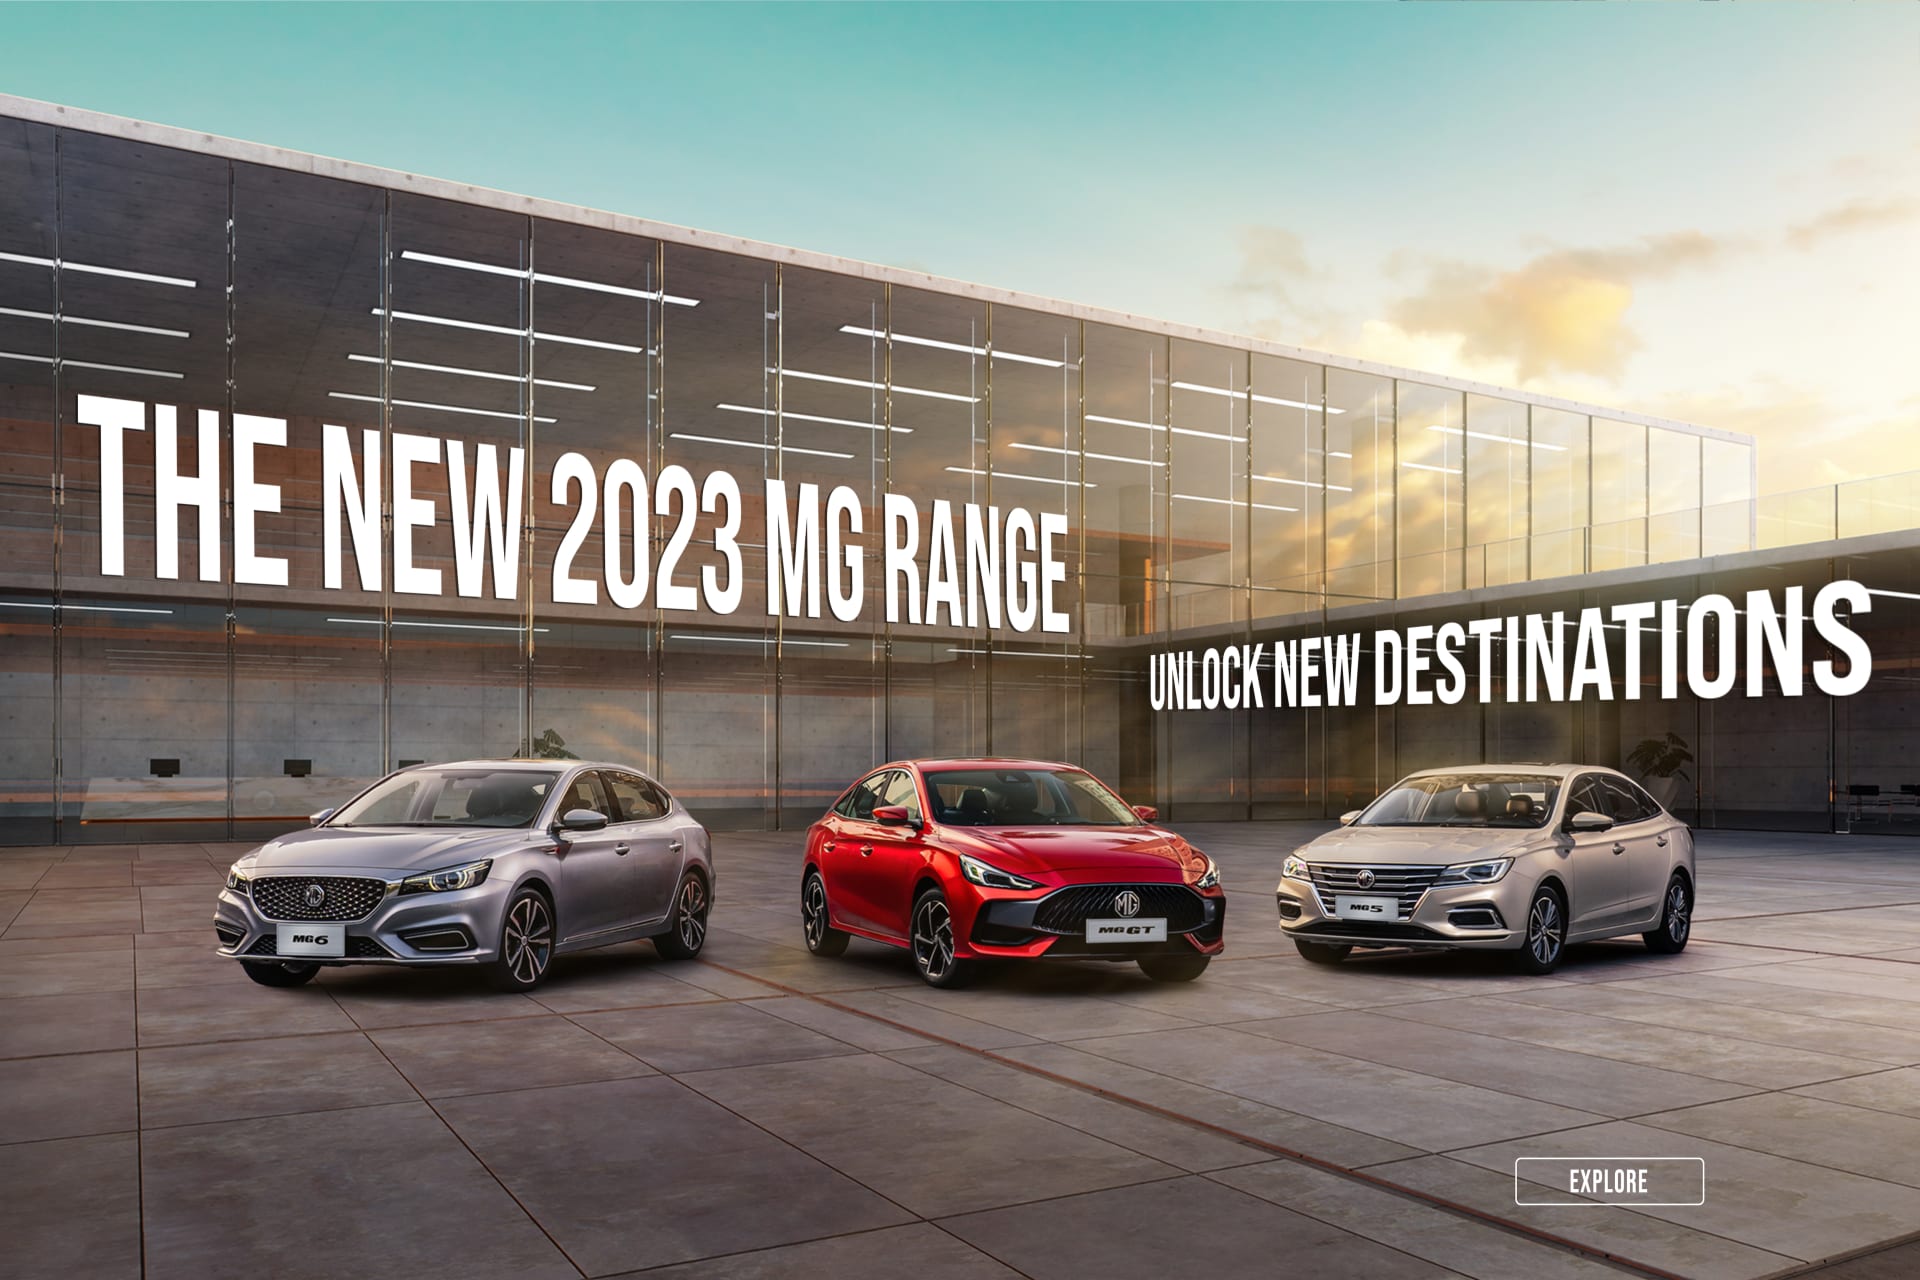 Gear Up For The New 2023 MG Range